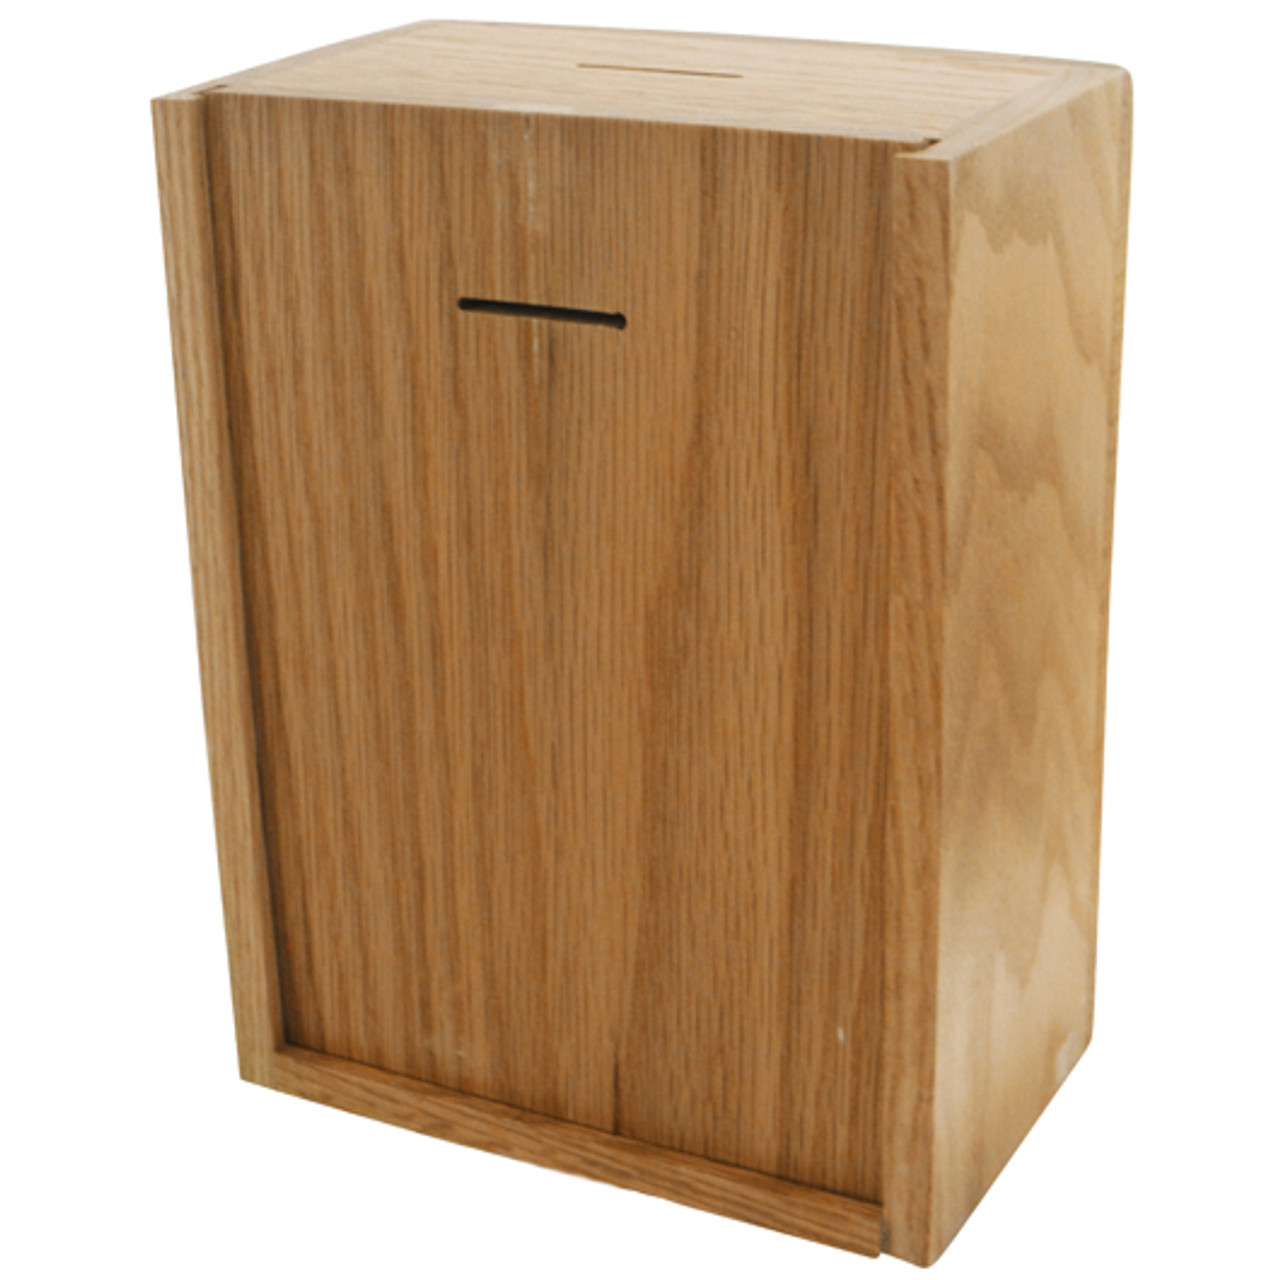 Wide Wooden Locked Wall Donation Box -01 - My Charity Boxes